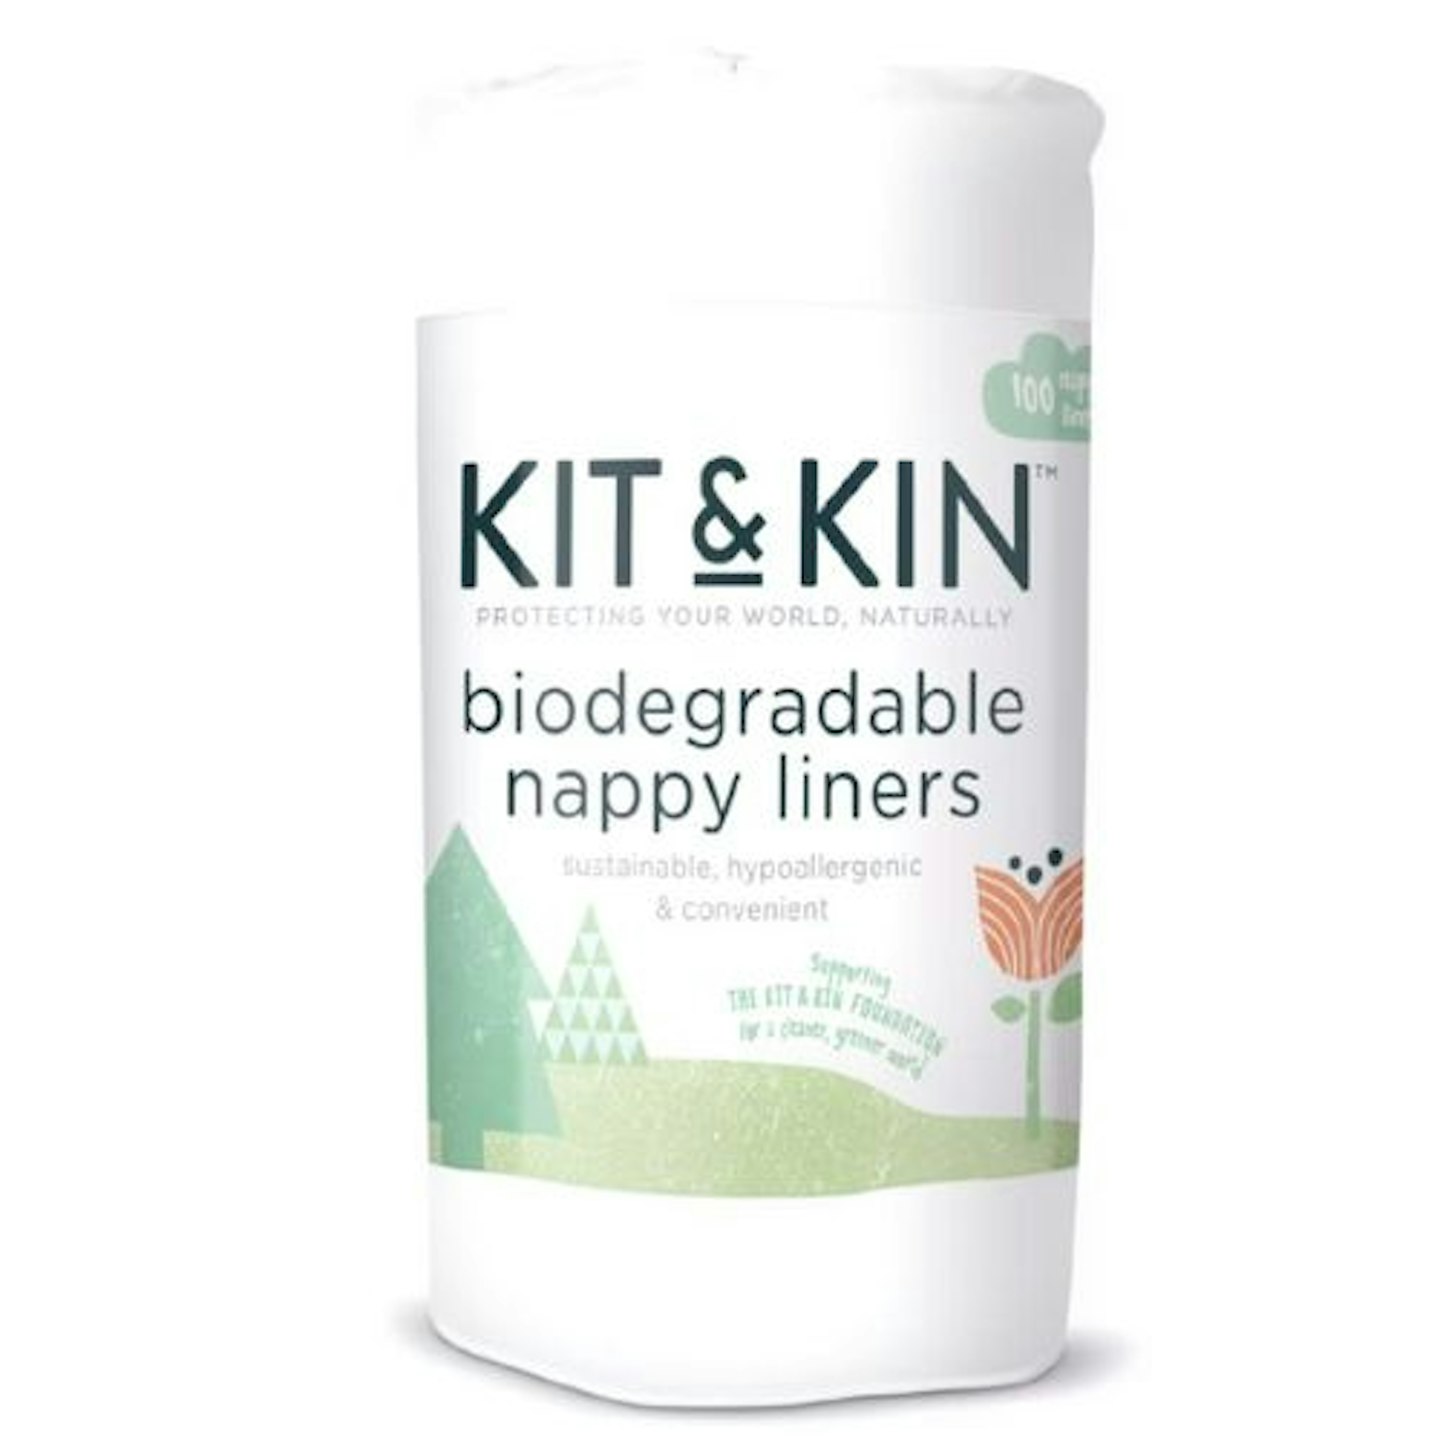 Kit & Kin Biodegradable Nappy Liners